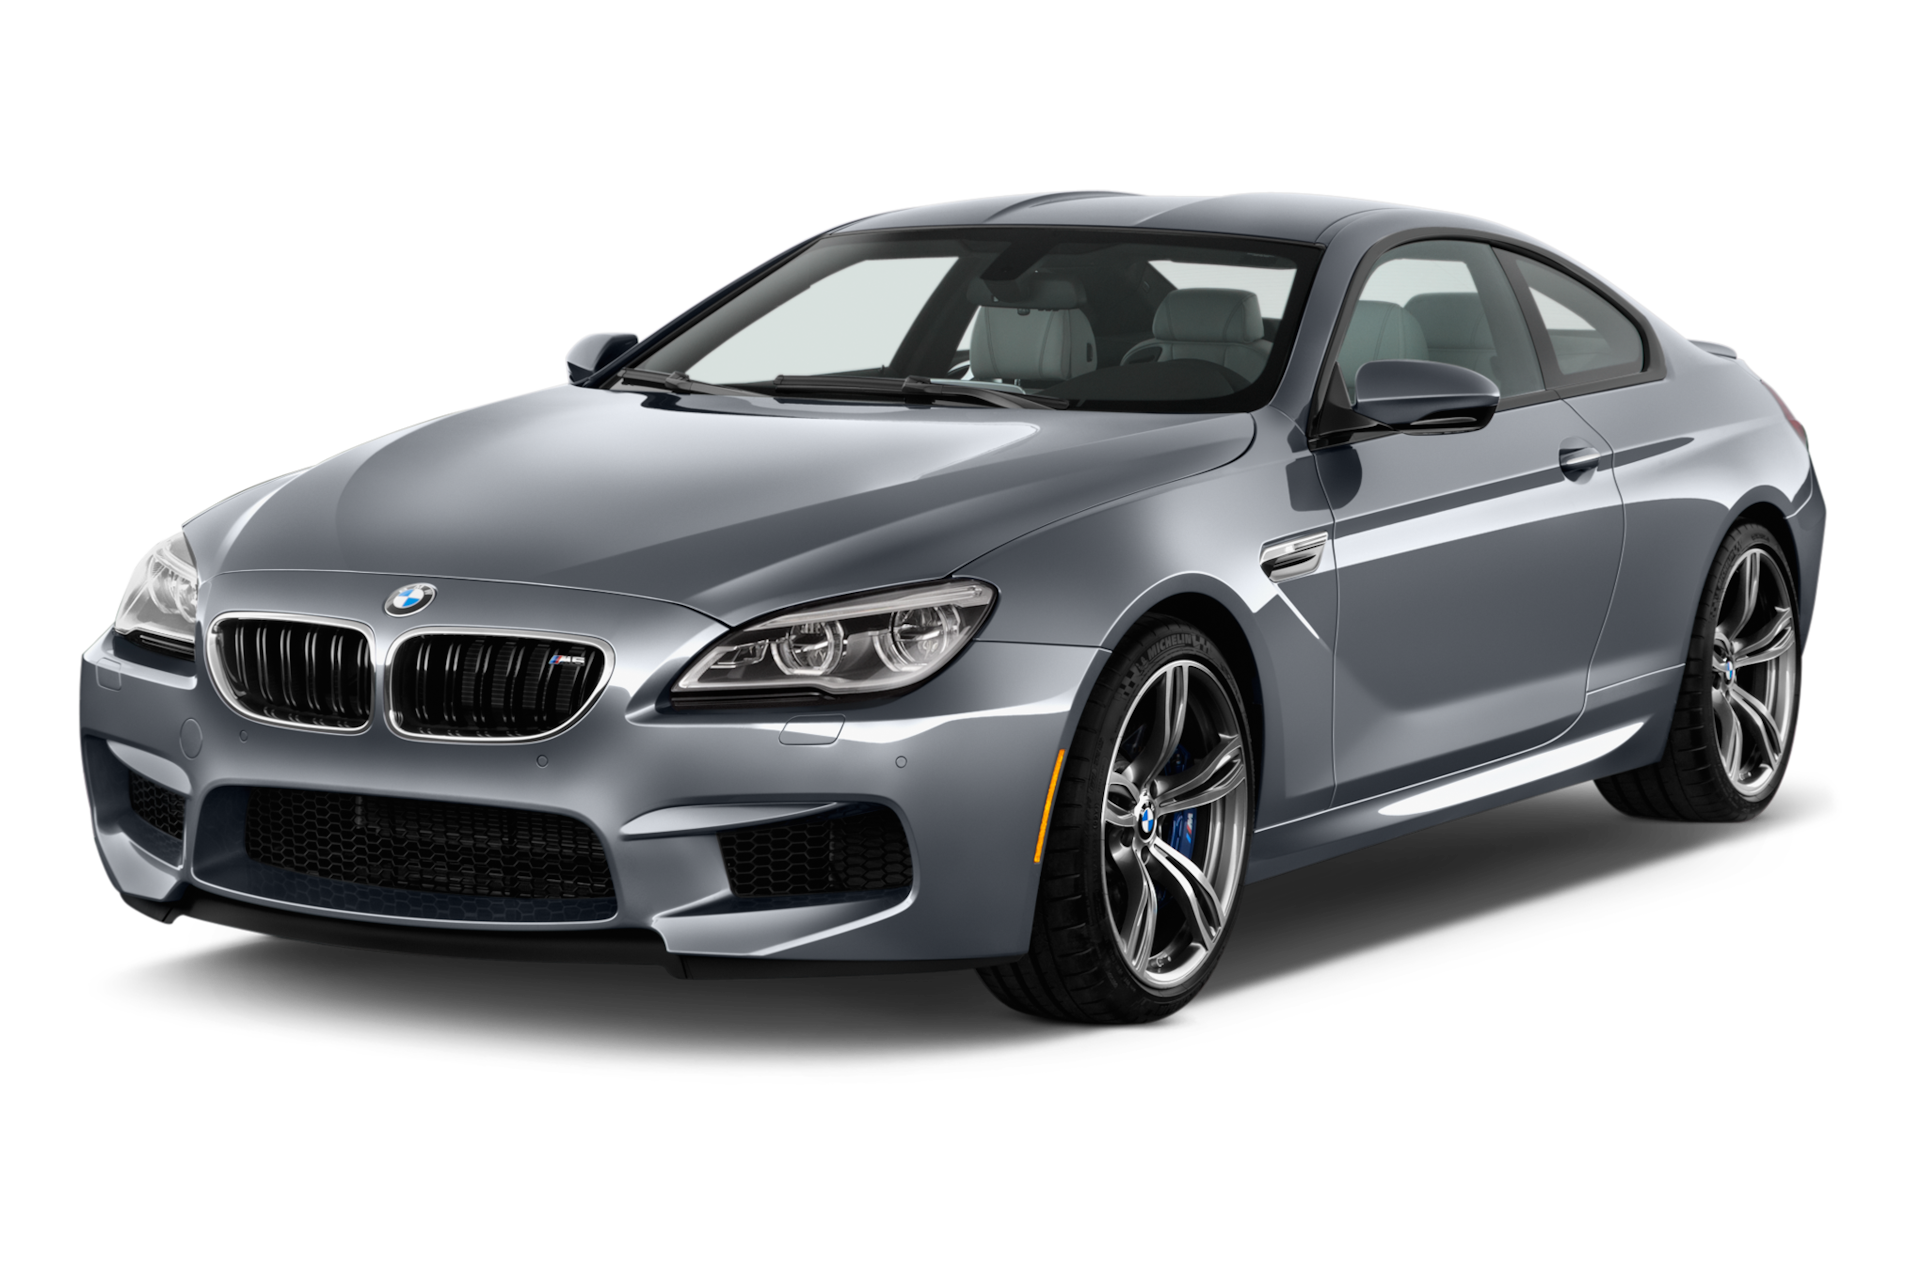 2017 BMW M6 Prices, Reviews, and Photos - MotorTrend